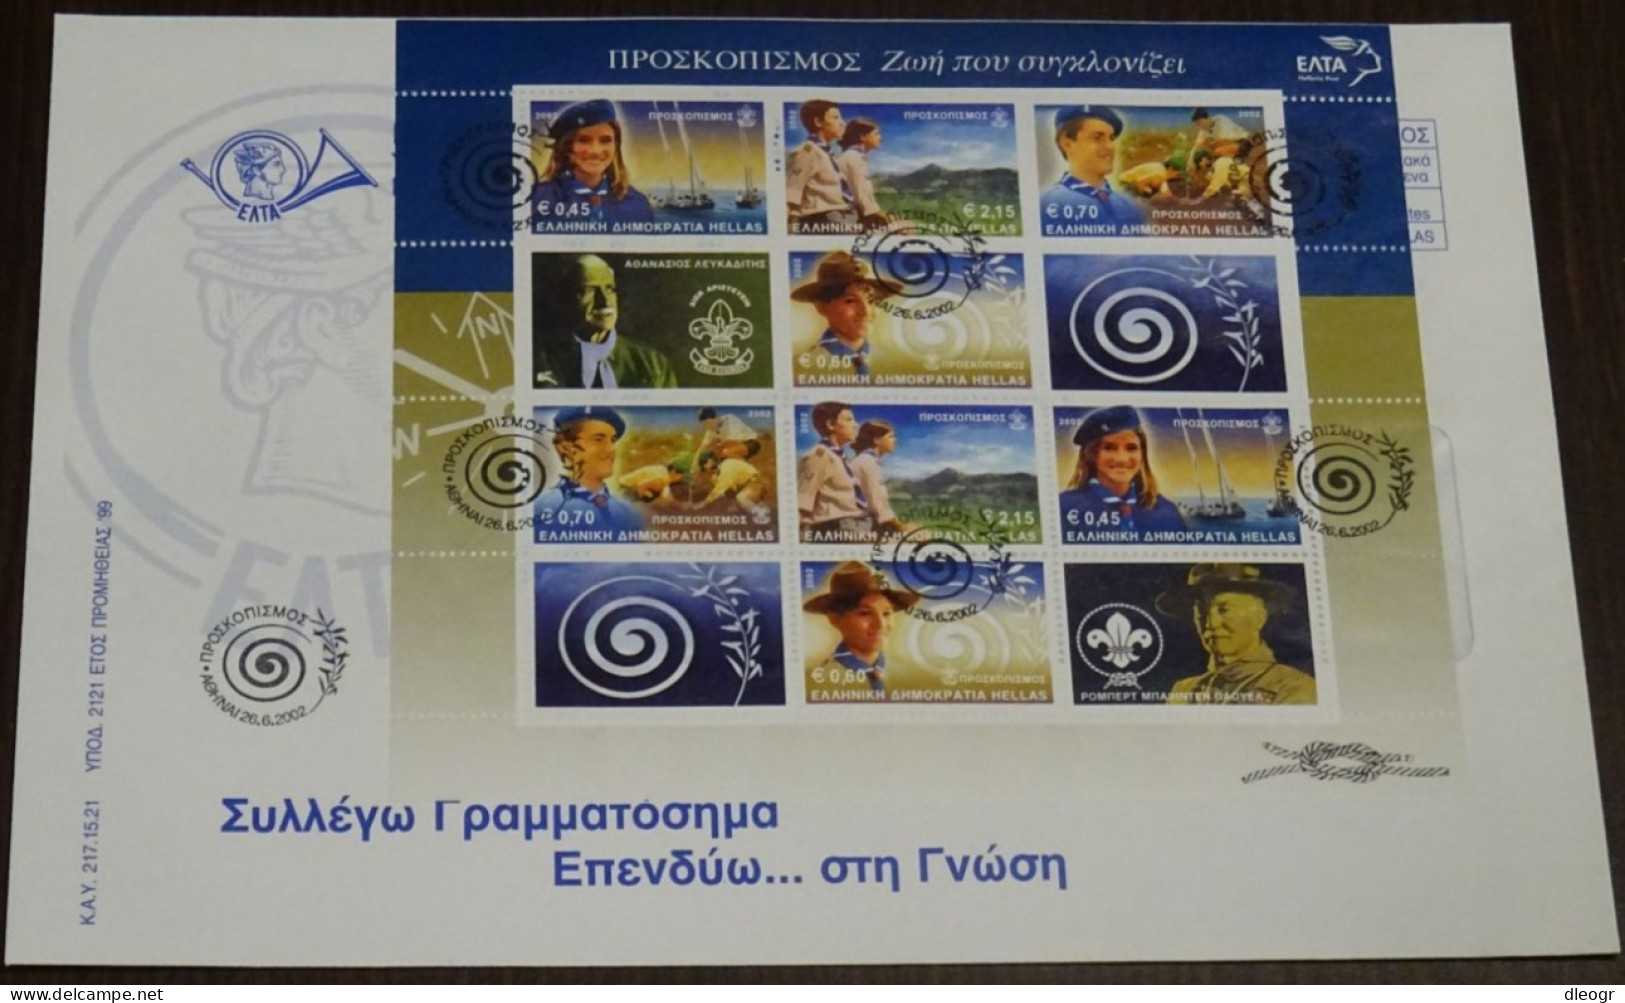 Greece 2002 Scouting Block Cover - FDC